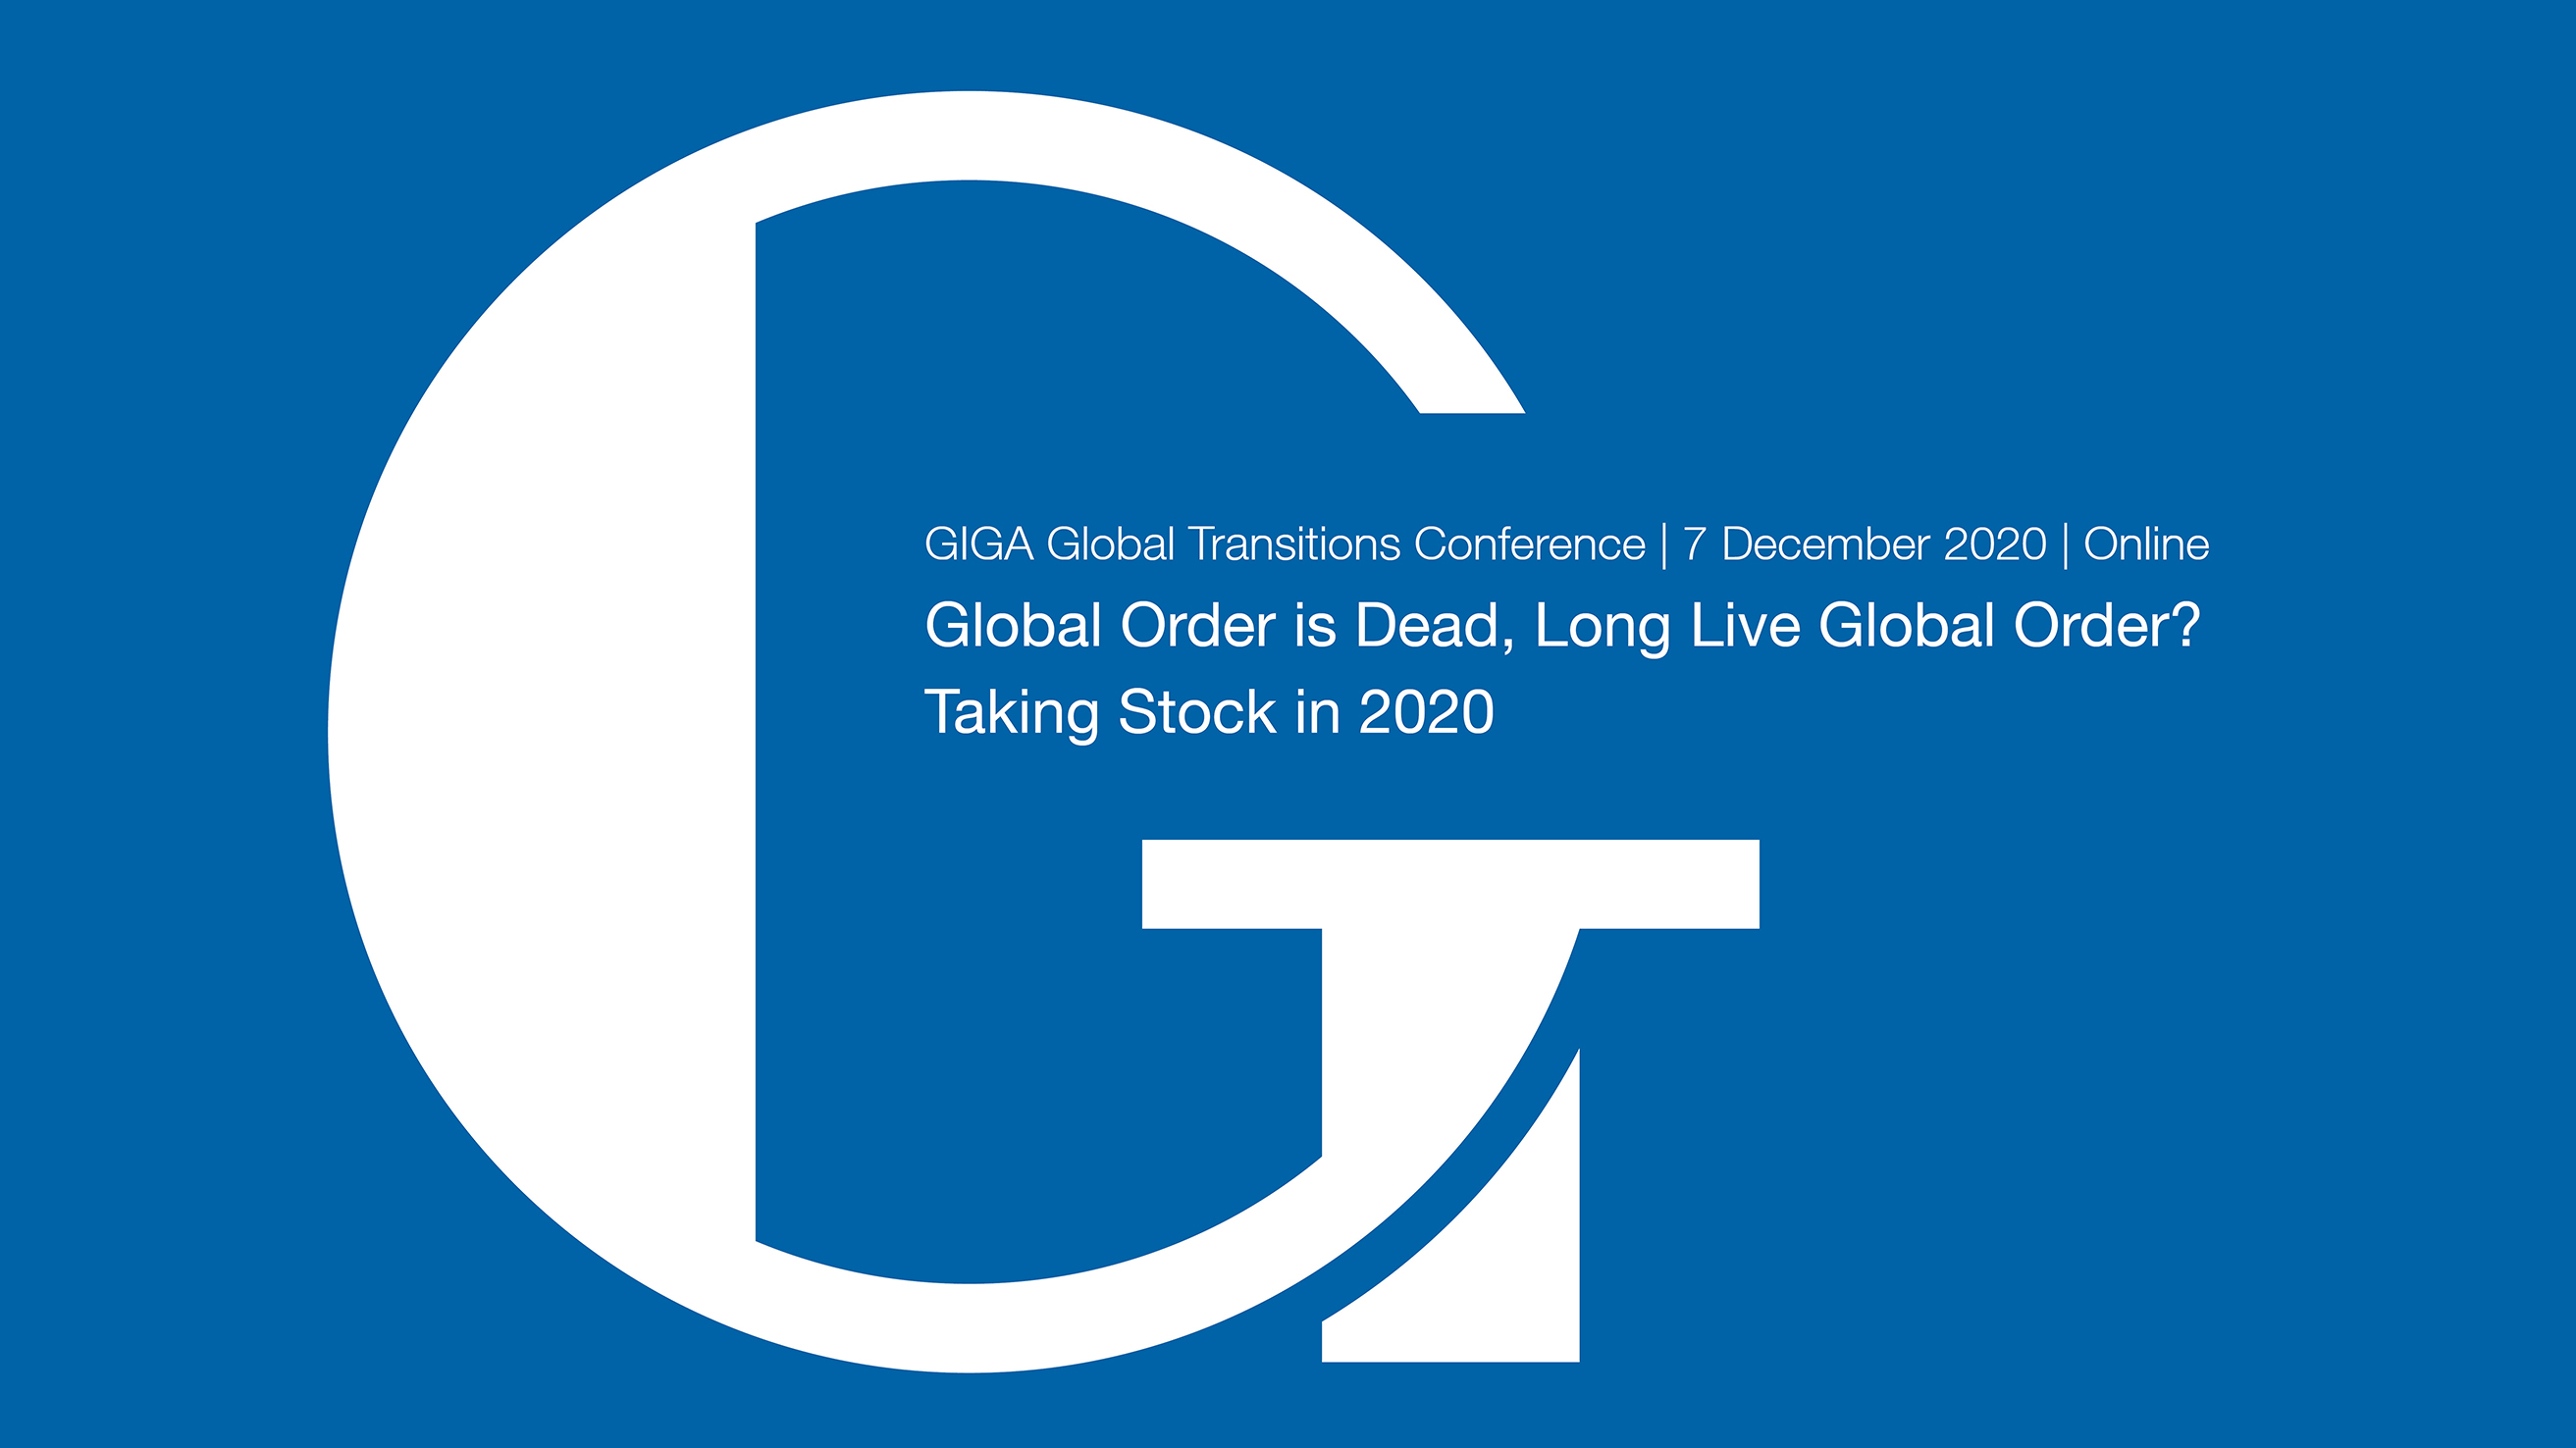 Blue and white Graphic of the GTC Conference logo